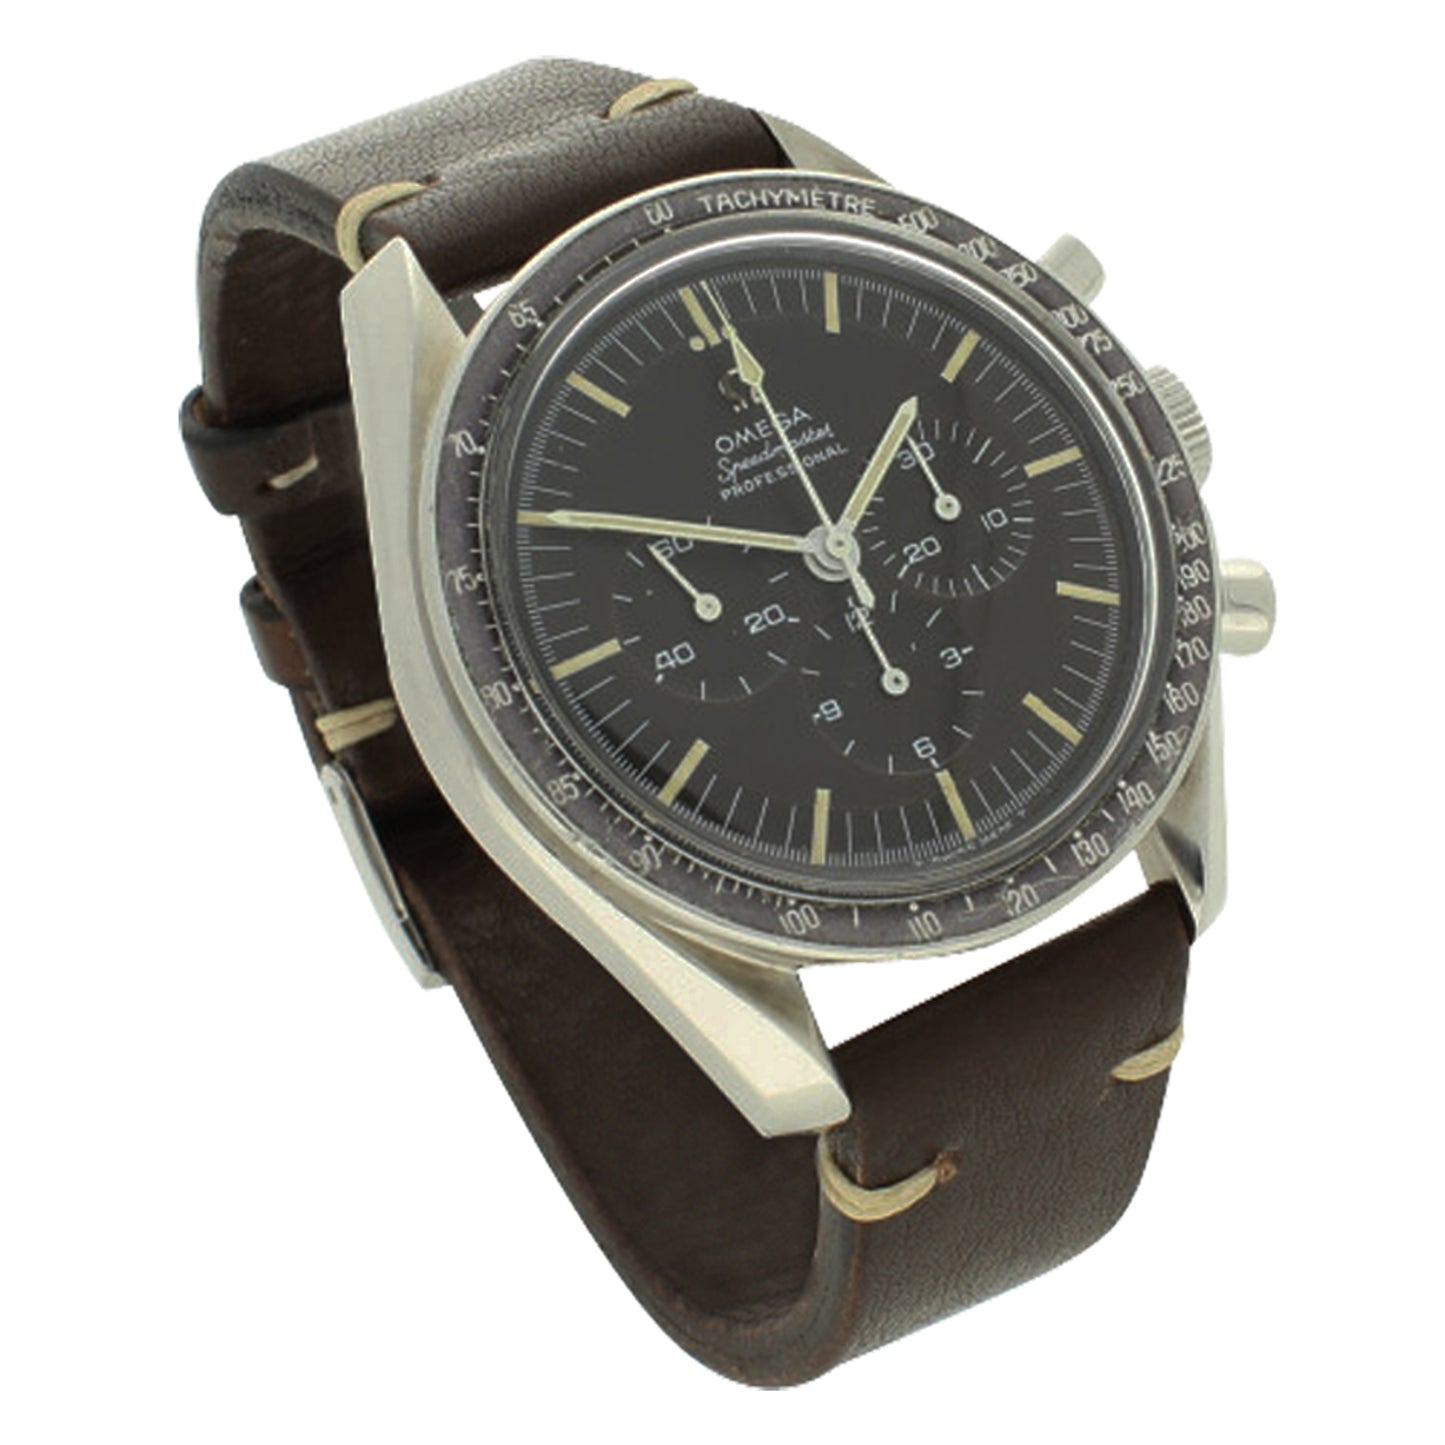 Stainless steel Speedmaster, reference 145.012 'Tropical dial' Professional chronograph wristwatch. Made 1968